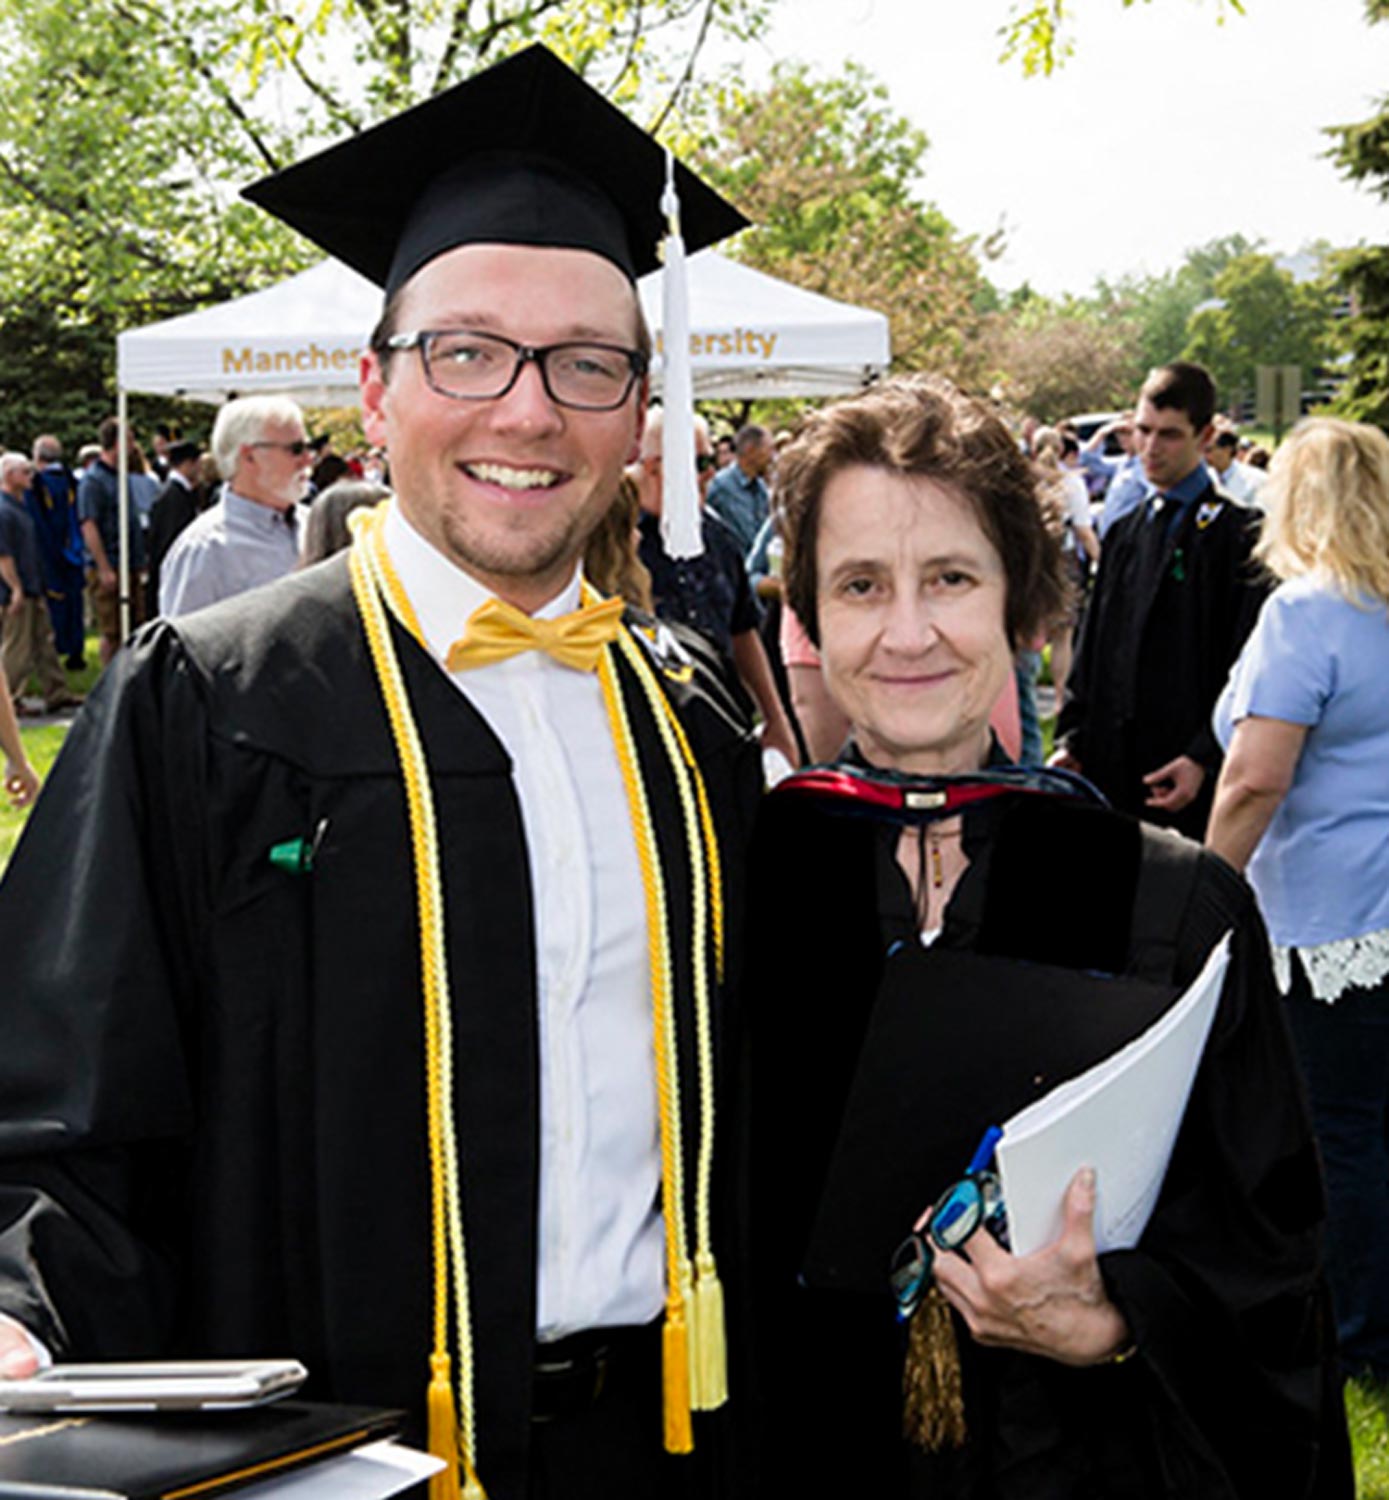 Beate Gilliar, wearing faculty robes, stands with Peter Shepherd wearing robes and a cap